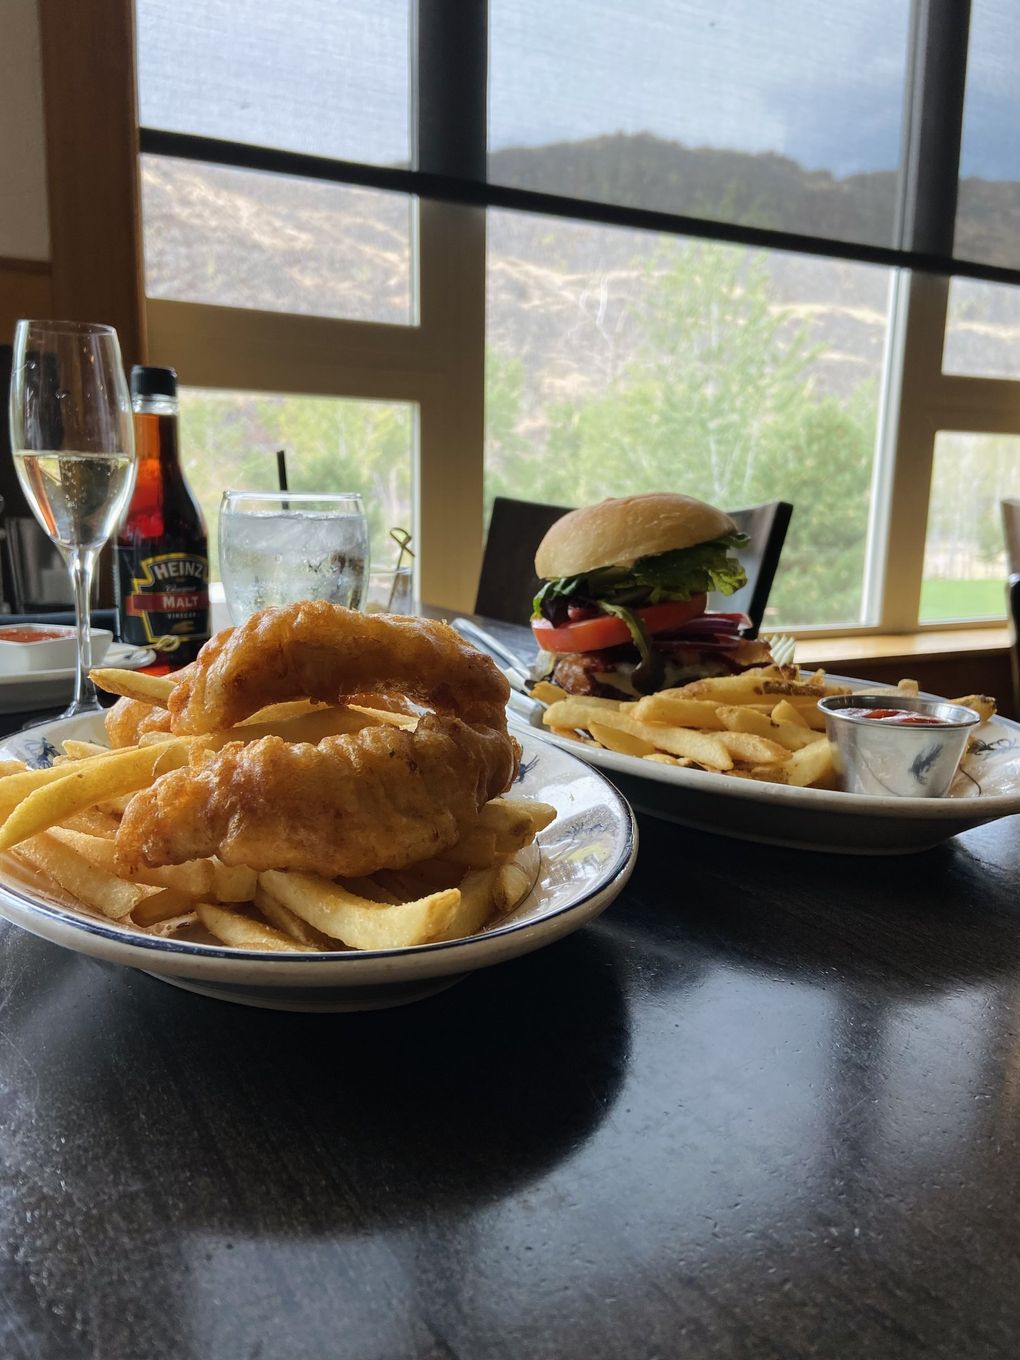 The crispy Alaskan ling cod fish and chips and the grilled S.F.R. American wagyu beef burger at the Canyon River Grill in Ellensburg, Washington, are winners. (Jazmin Tolliver / The Seattle Times)